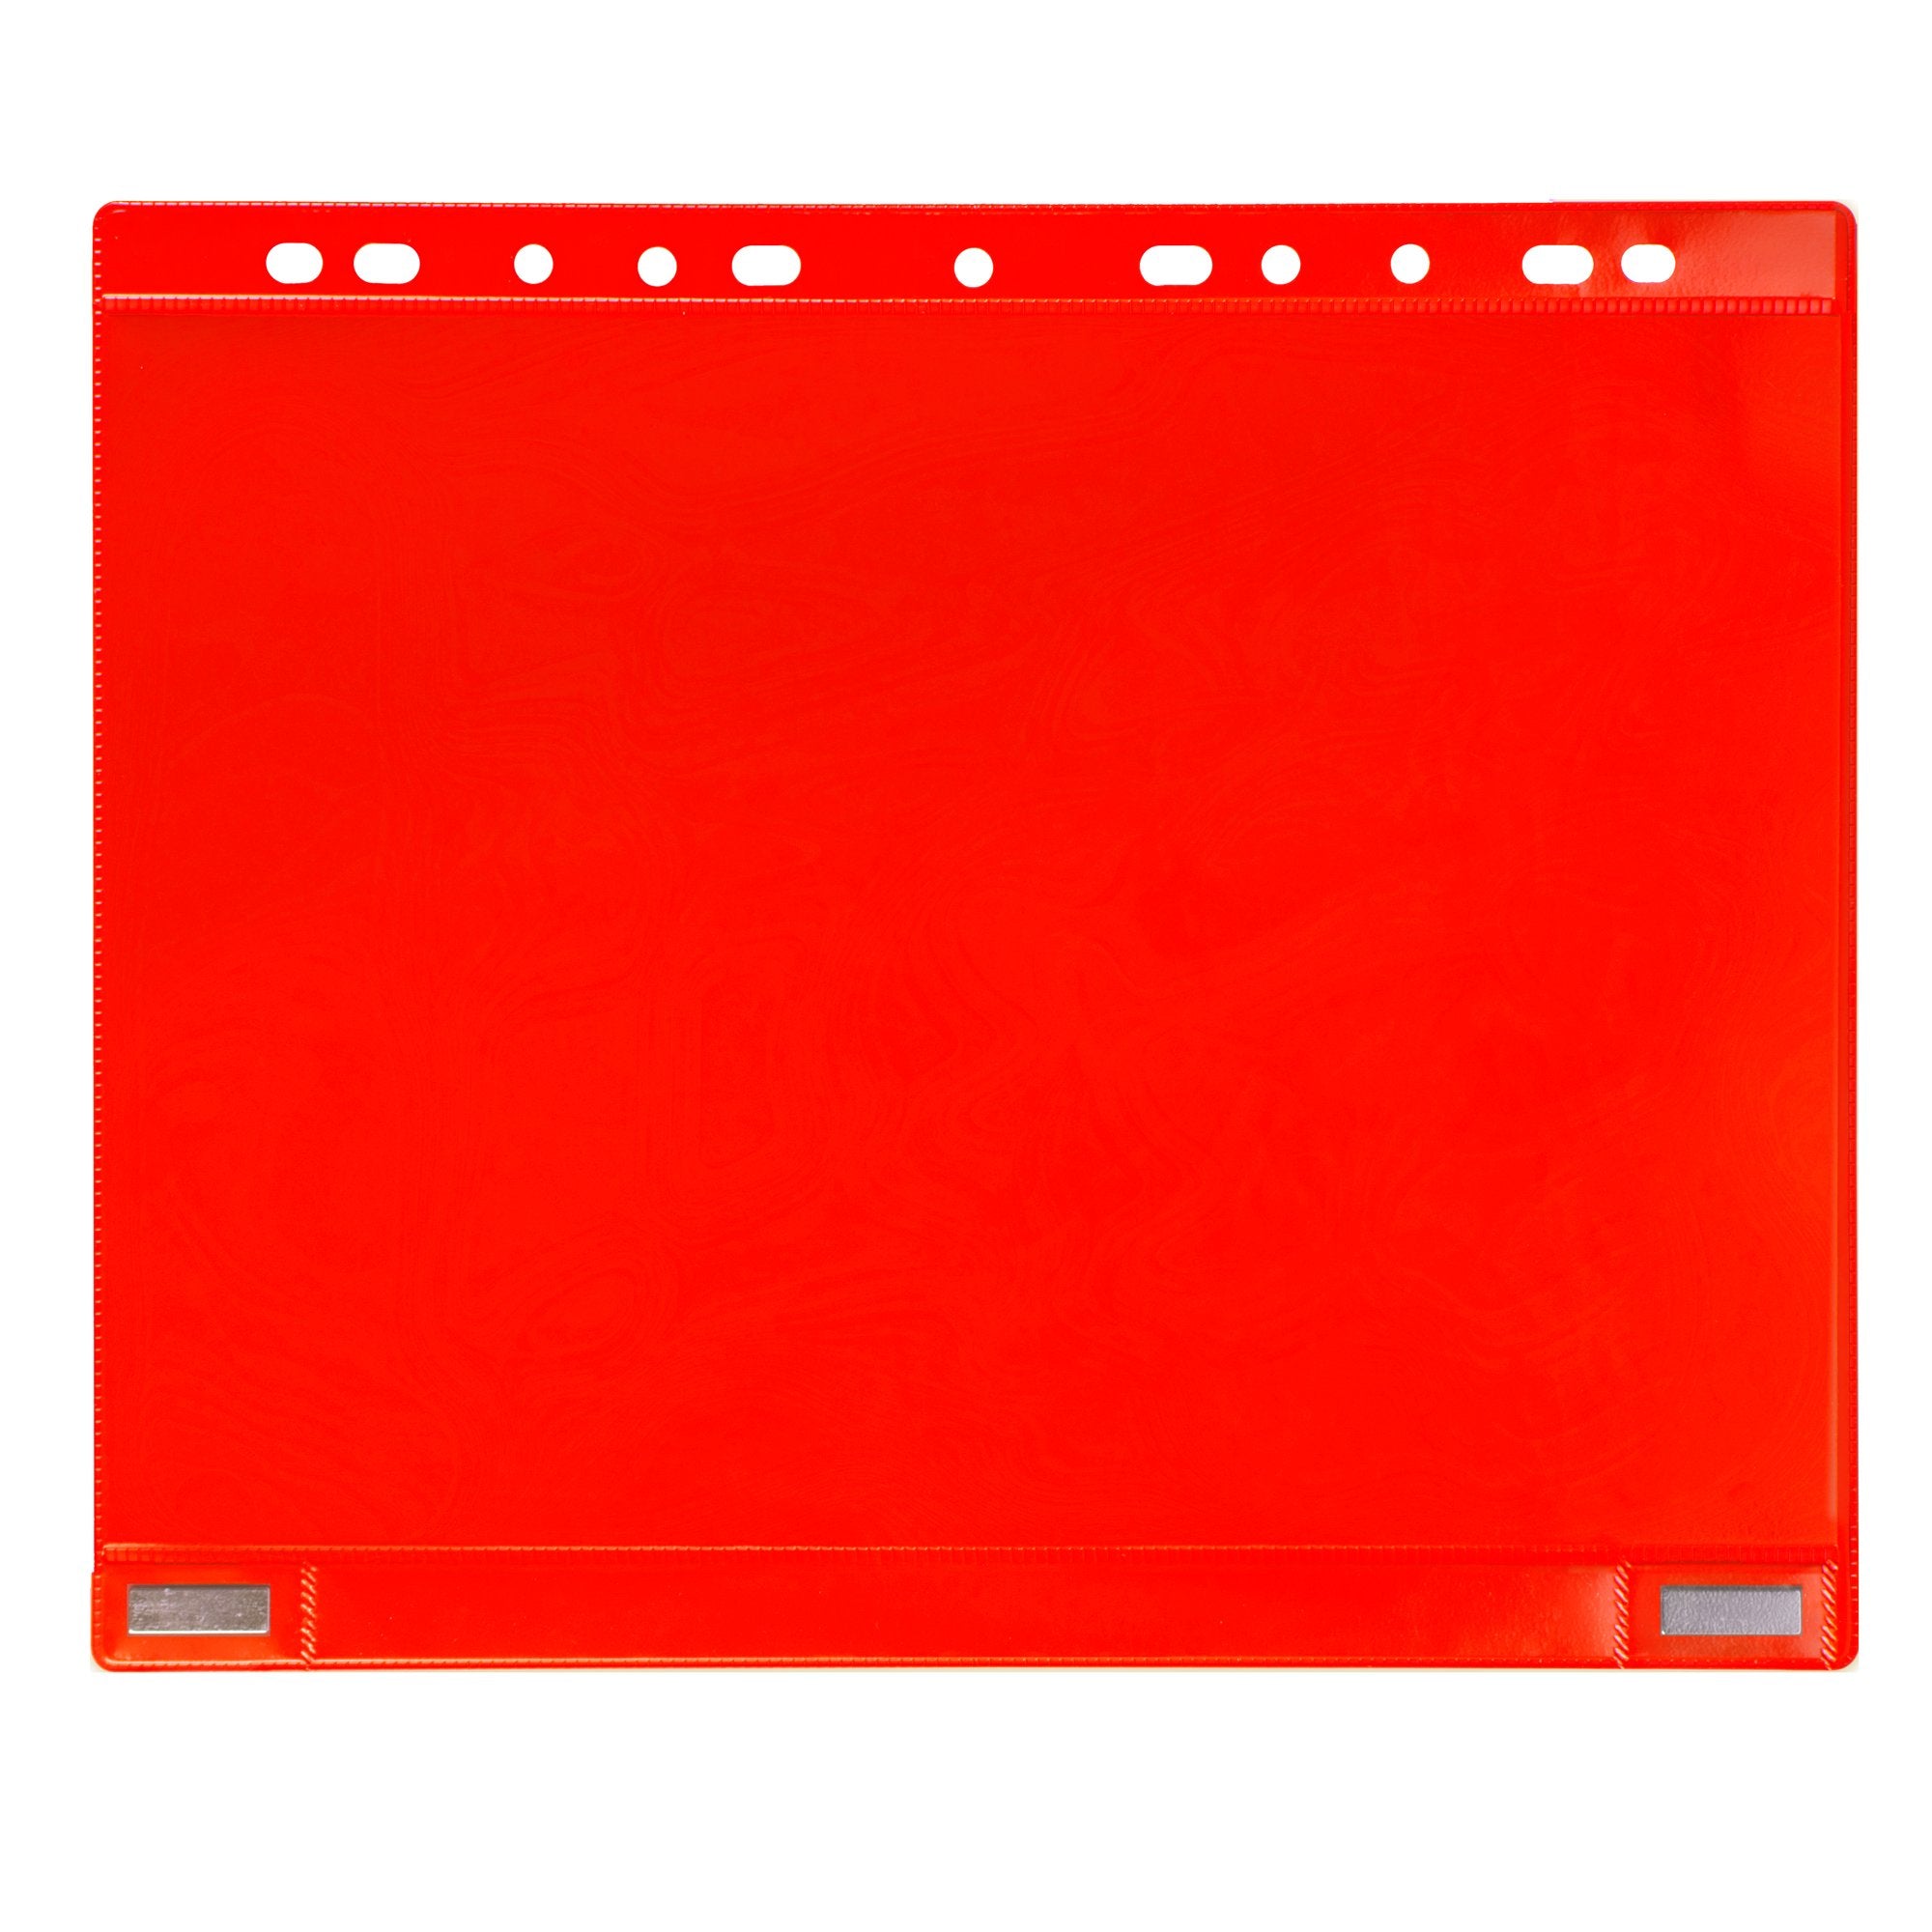 tarifold-conf-5-buste-forate-supporti-magnetici-anelli-f-to-a4-rosso